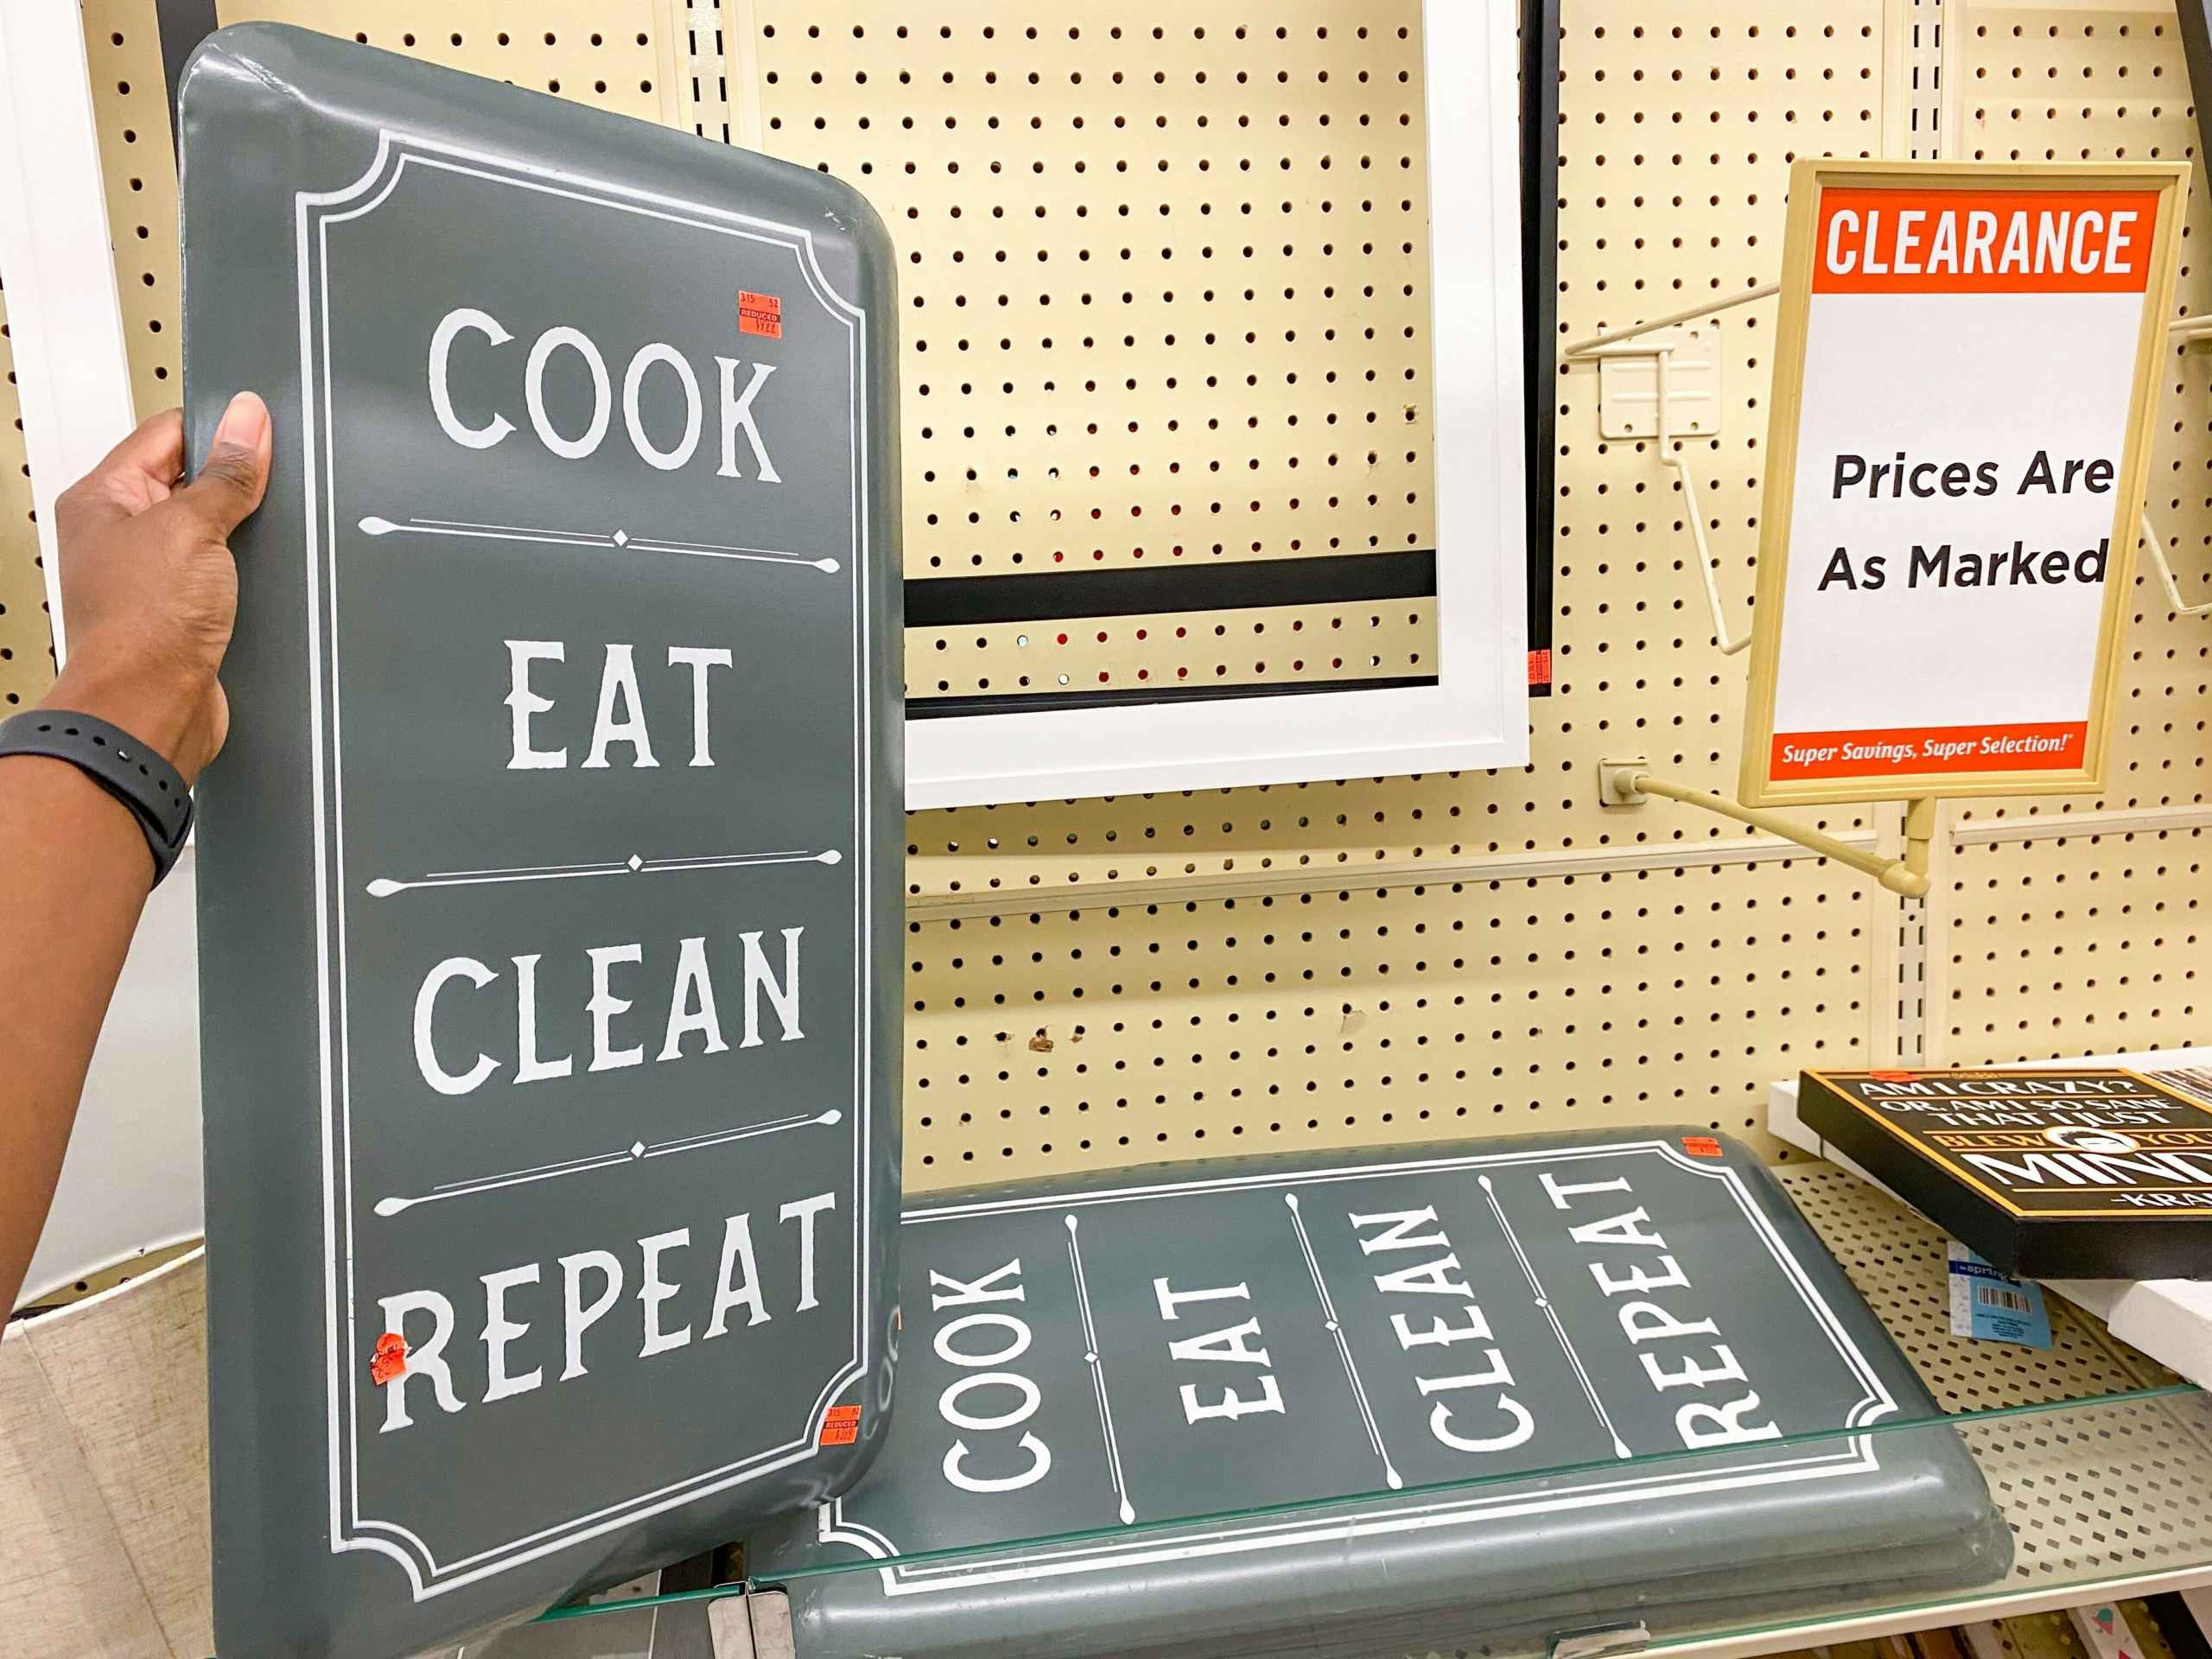 hobby lobby cook eat clean repeat sign spring shop 2022